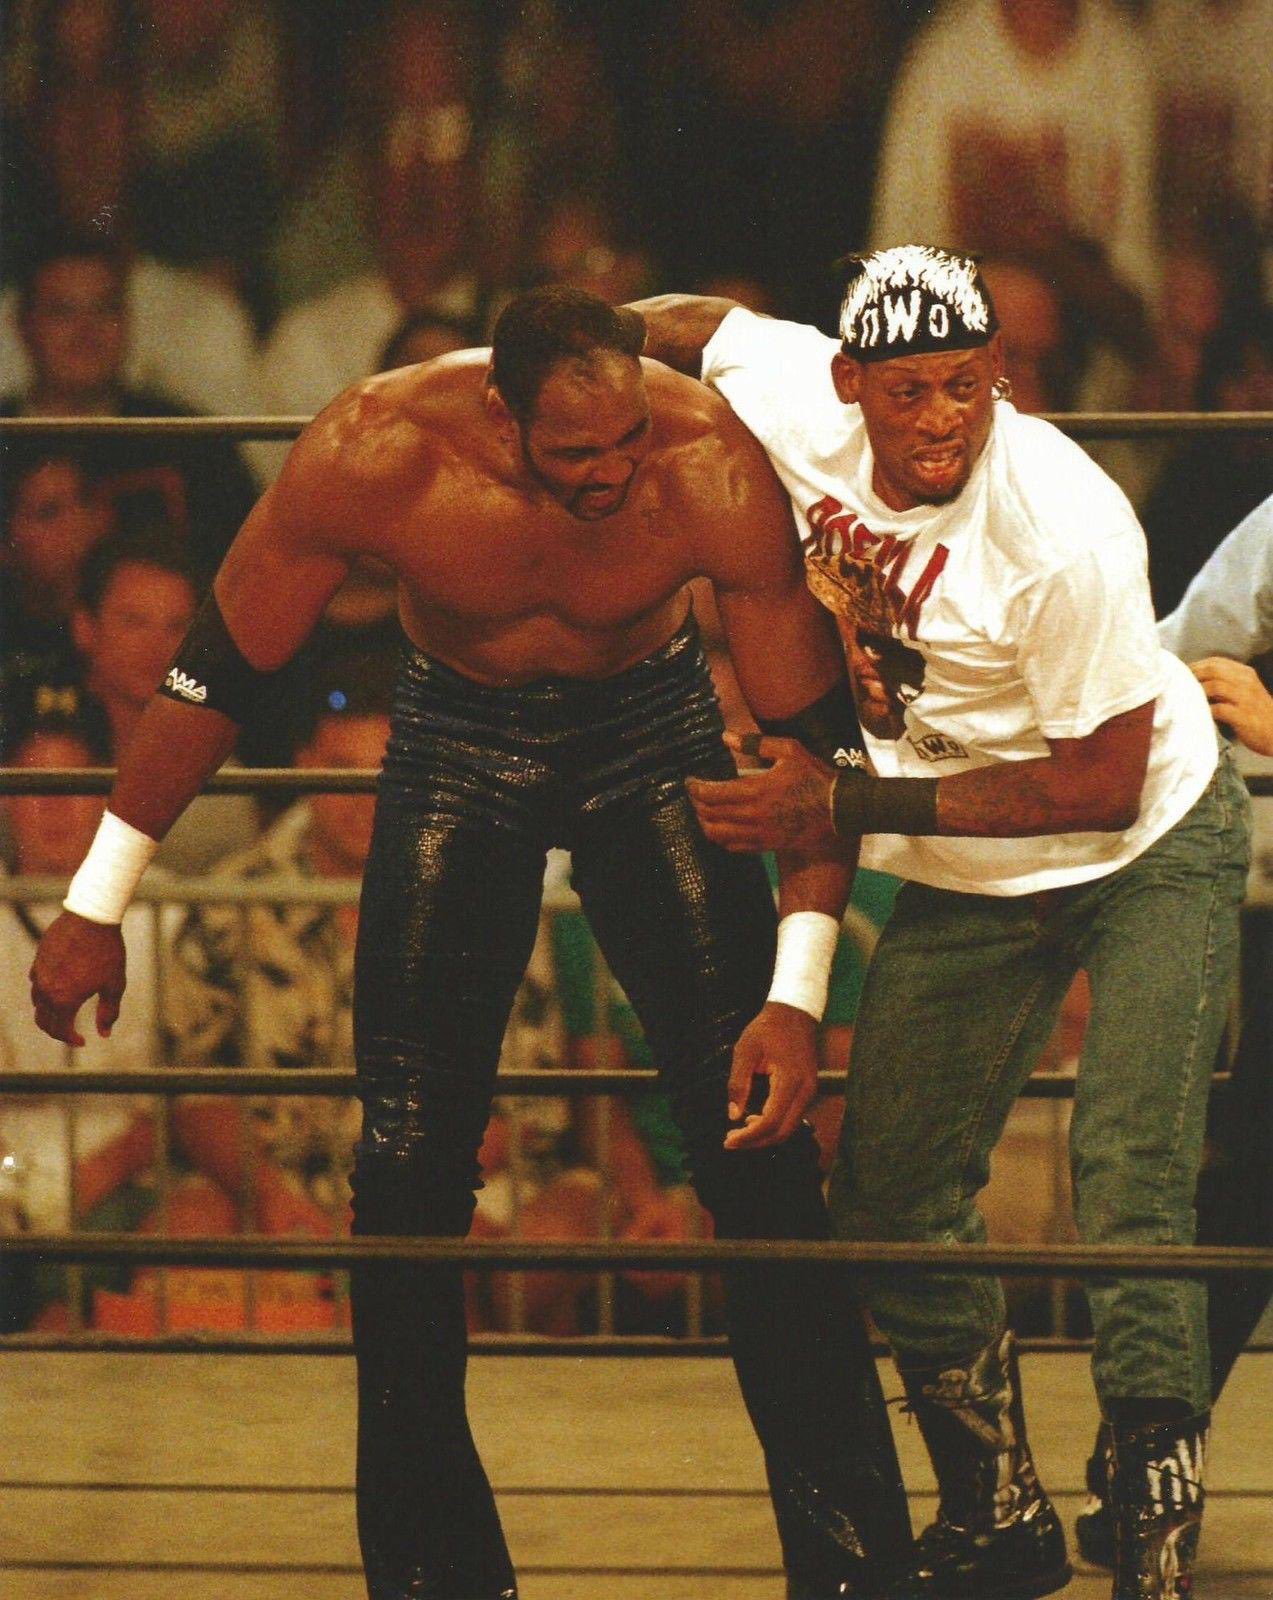 Behind the scenes from 20 years ago as Karl Malone wrestled Dennis